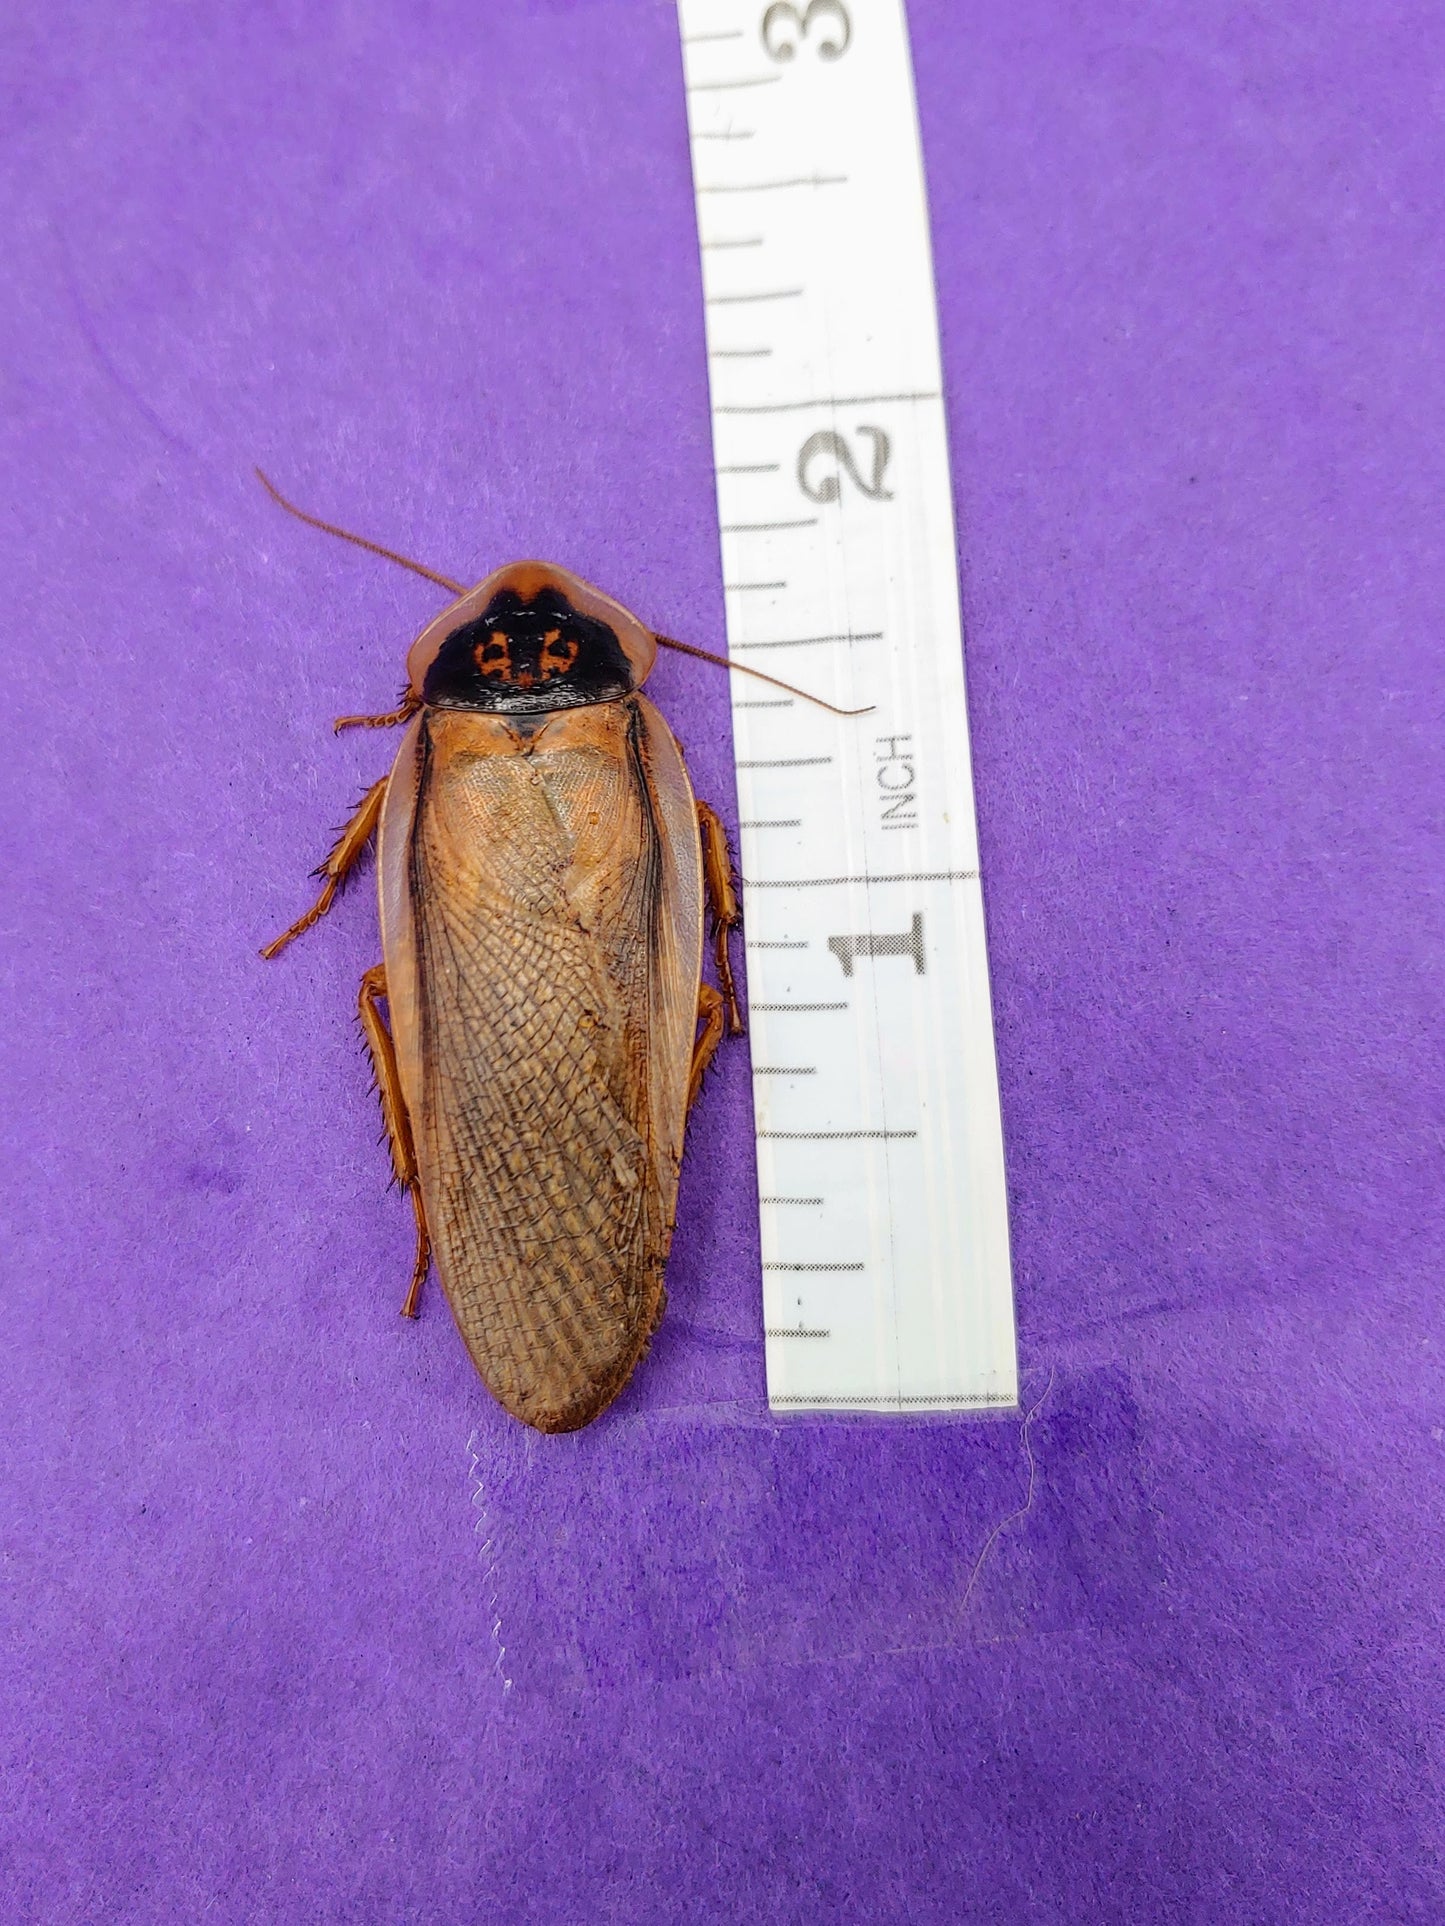 adult male dubia roaches